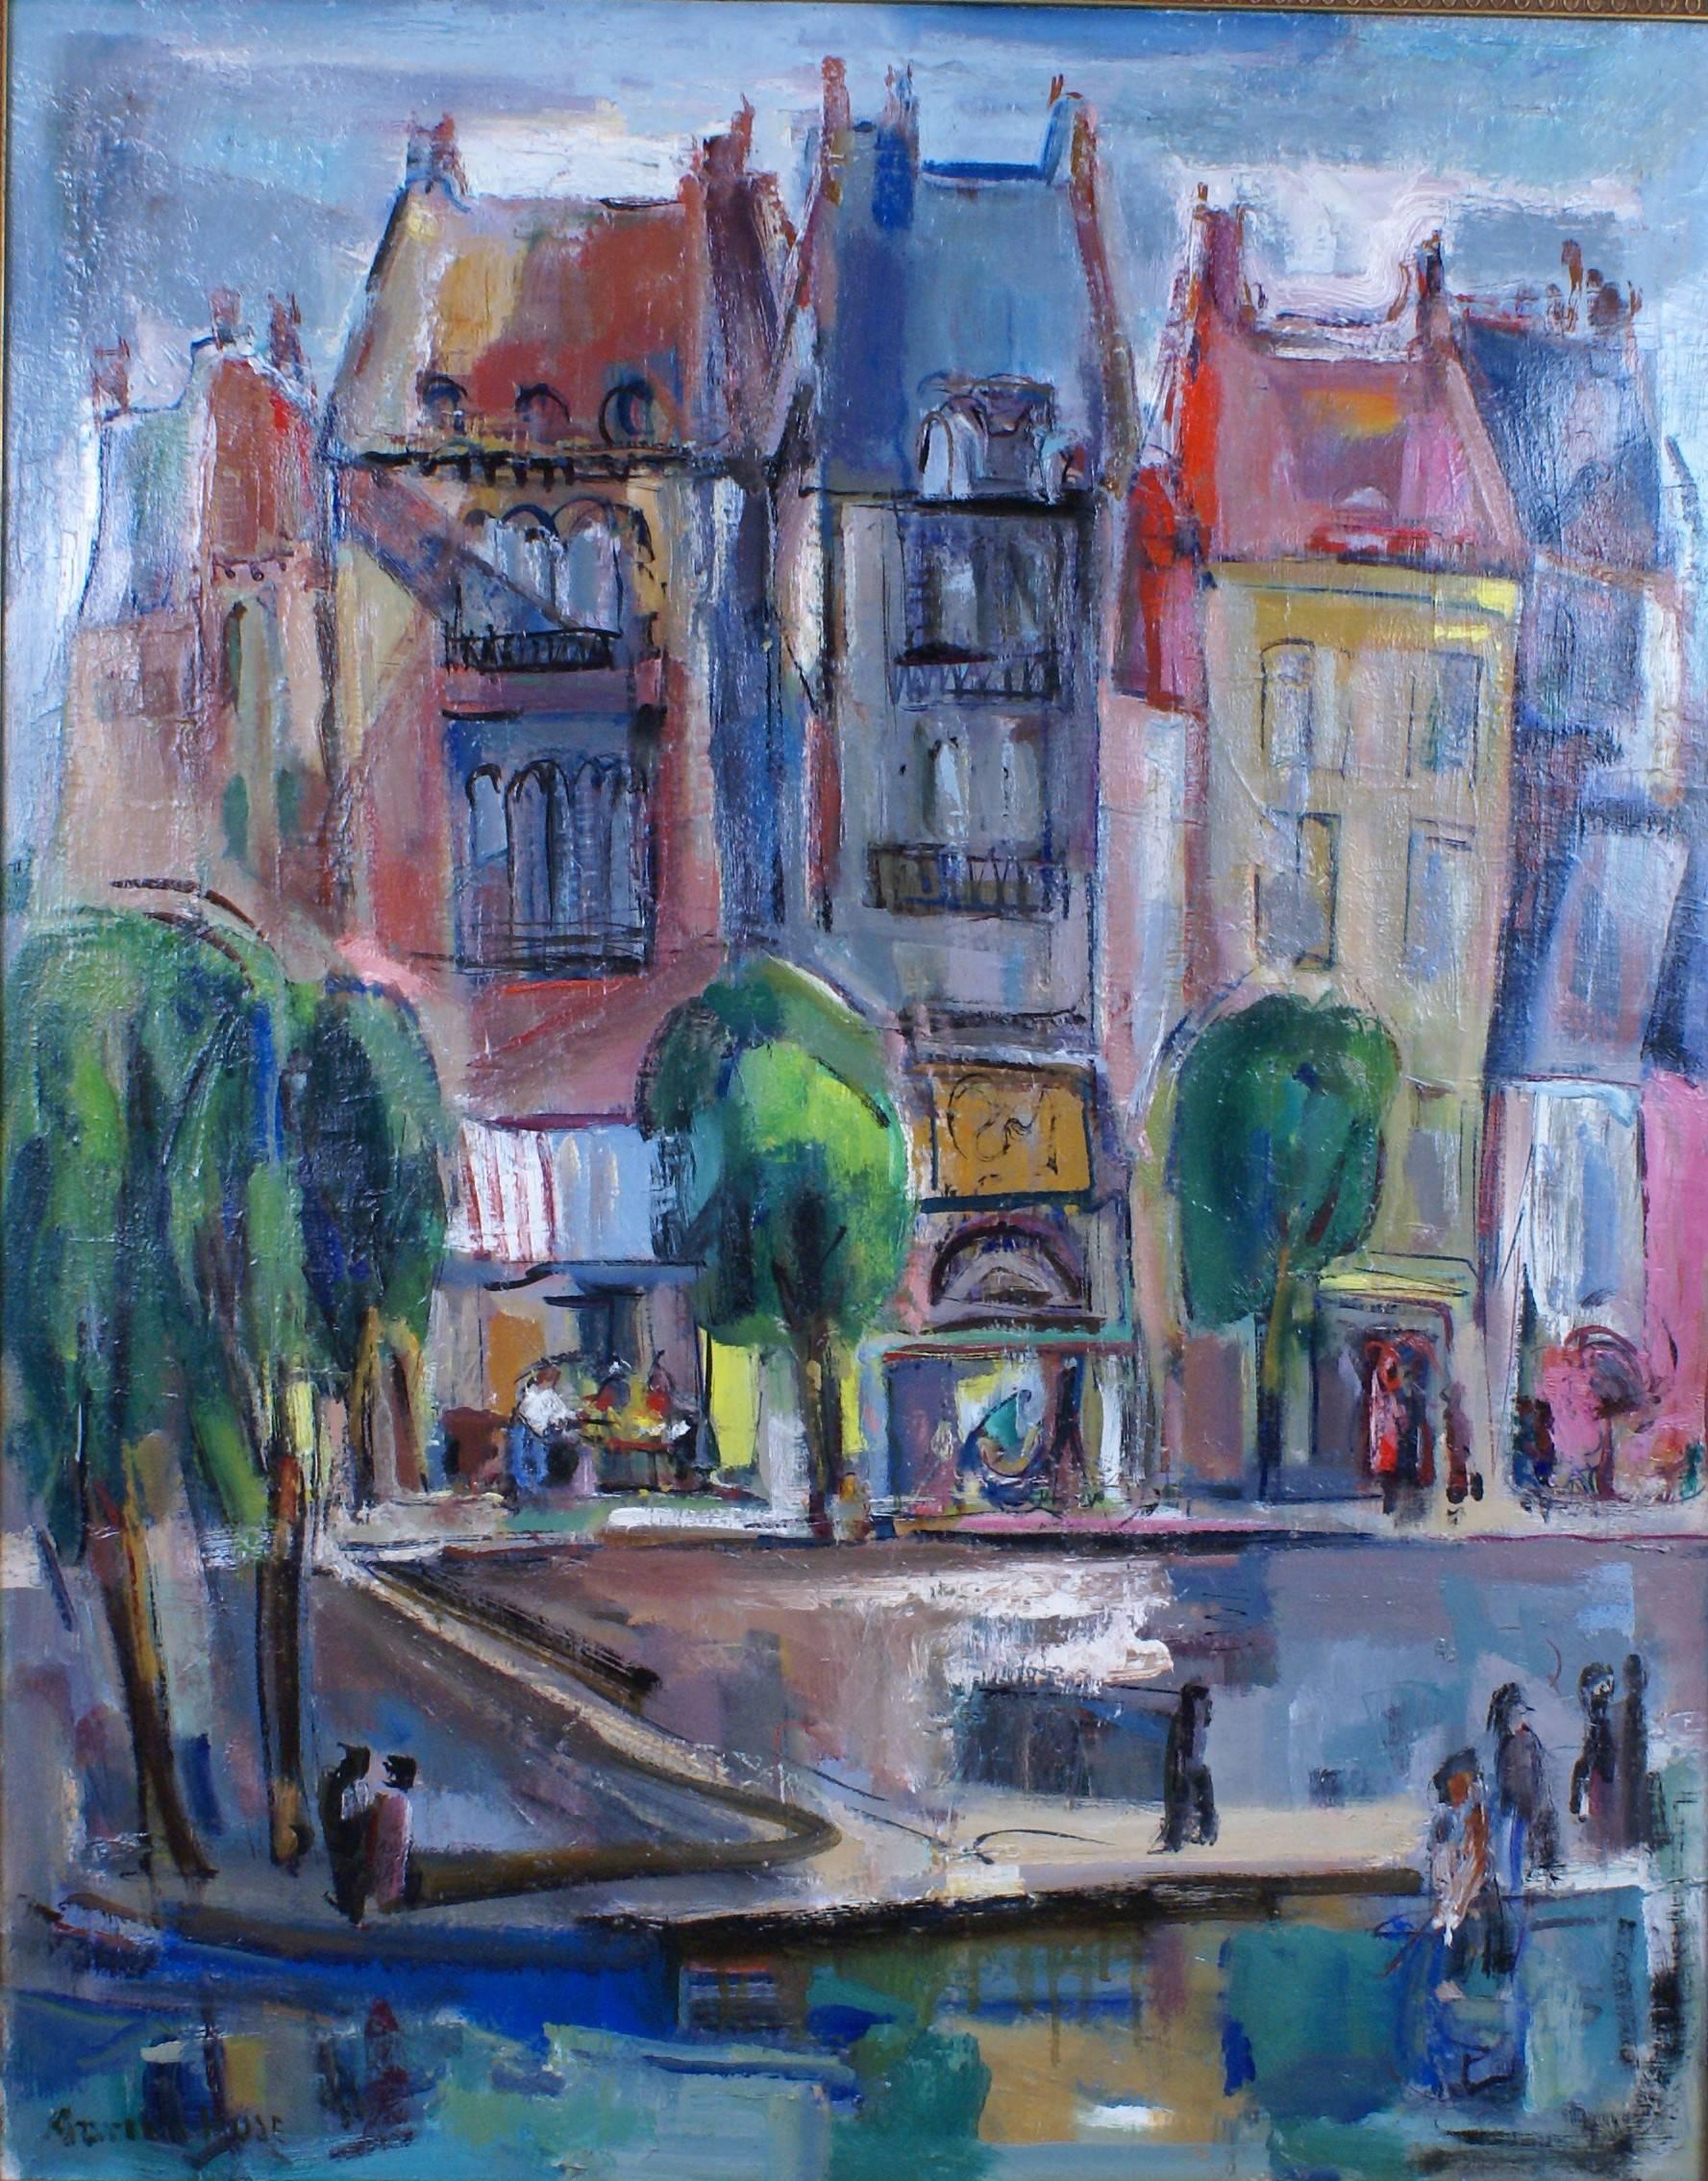 Along the Quai - Painting by Marion Huse